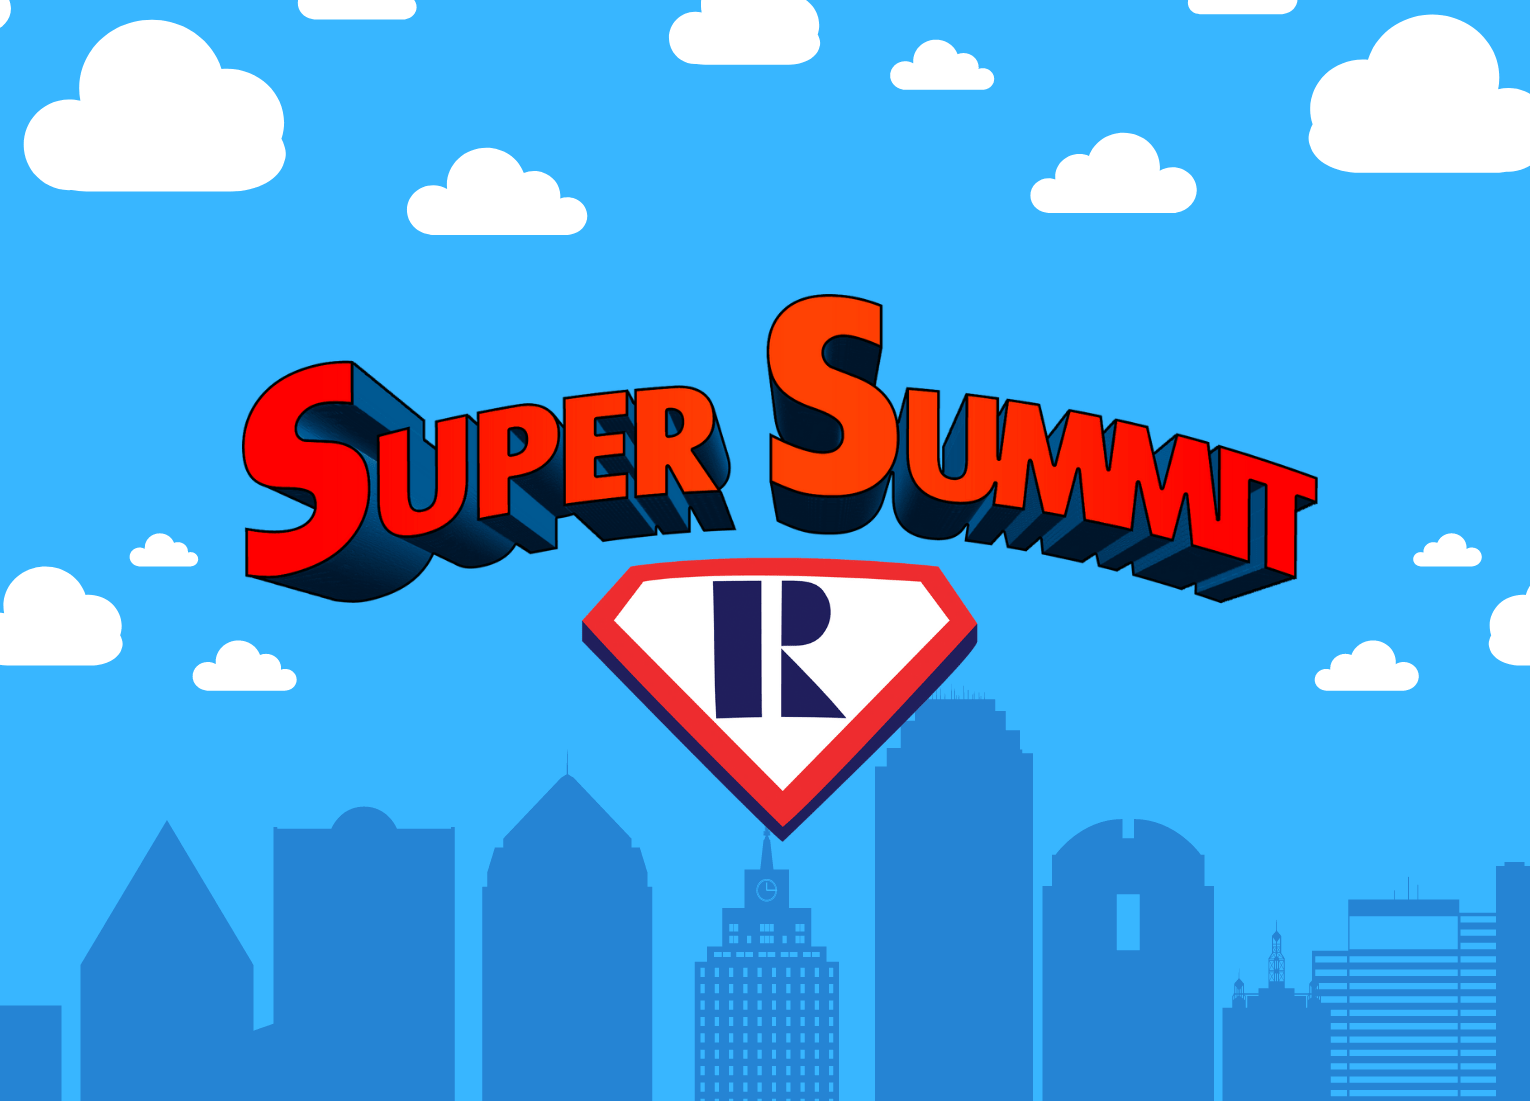 Super Summit 2022 Greater Denton/Wise County Association of REALTORS®